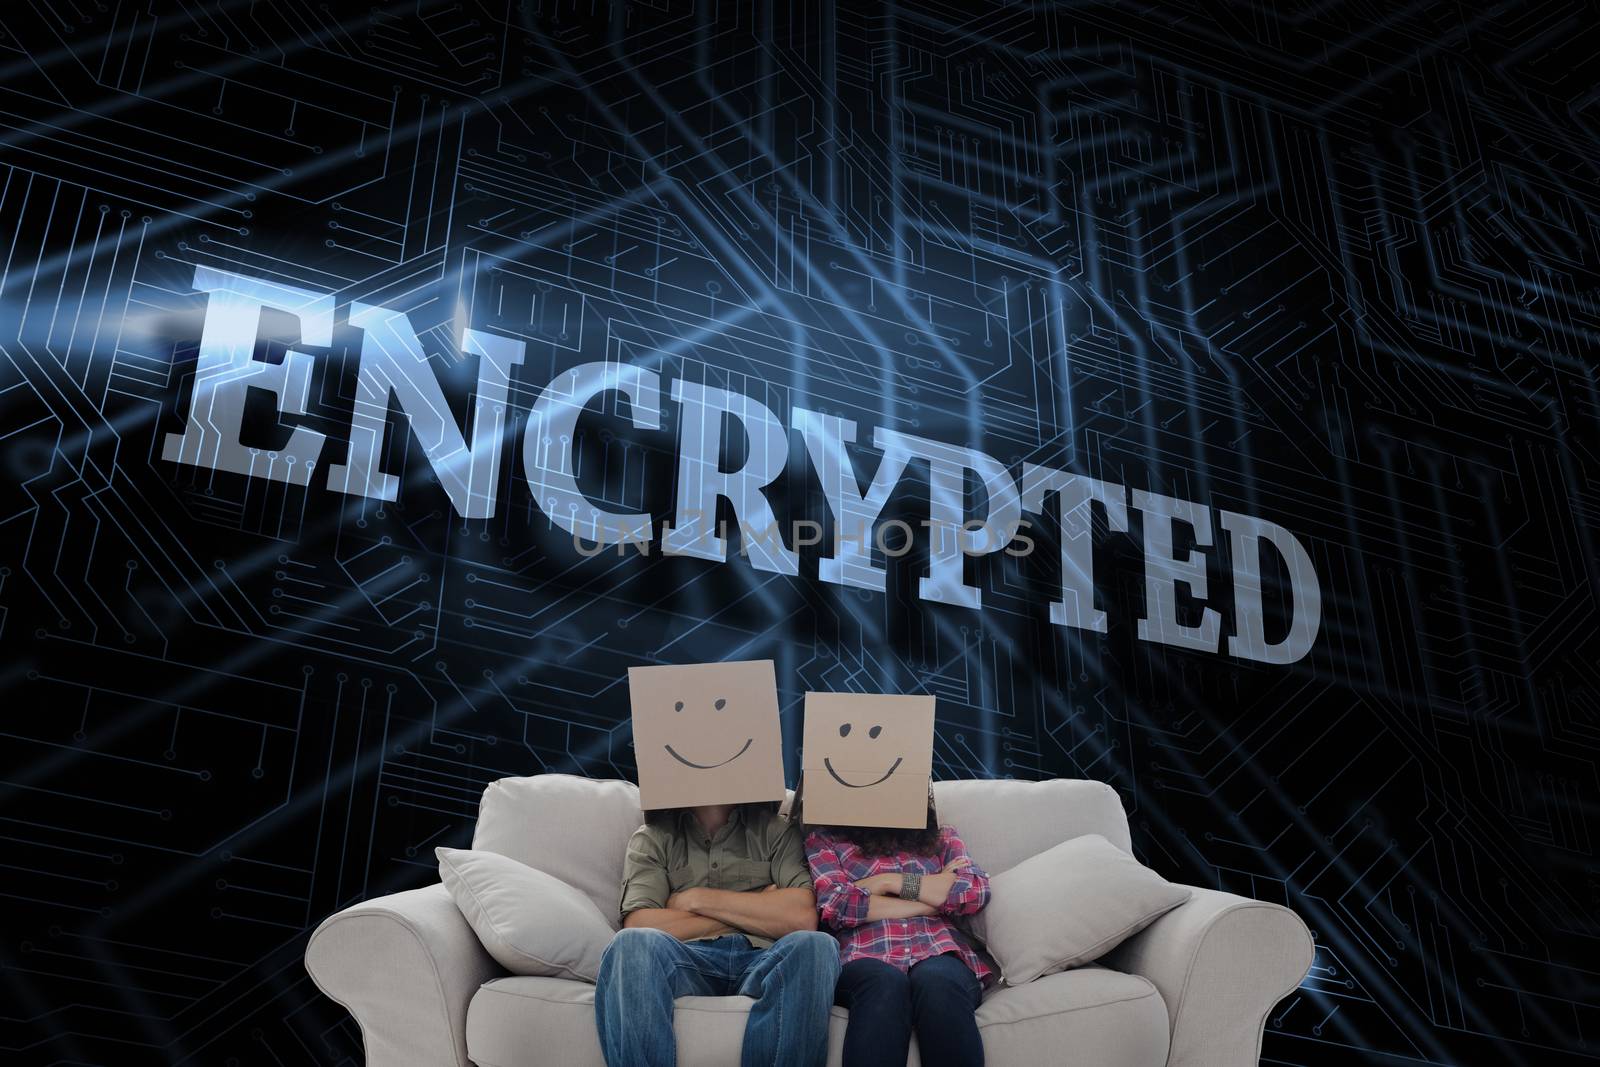 The word encrypted and silly employees with arms folded wearing boxes on their heads against futuristic black and blue background